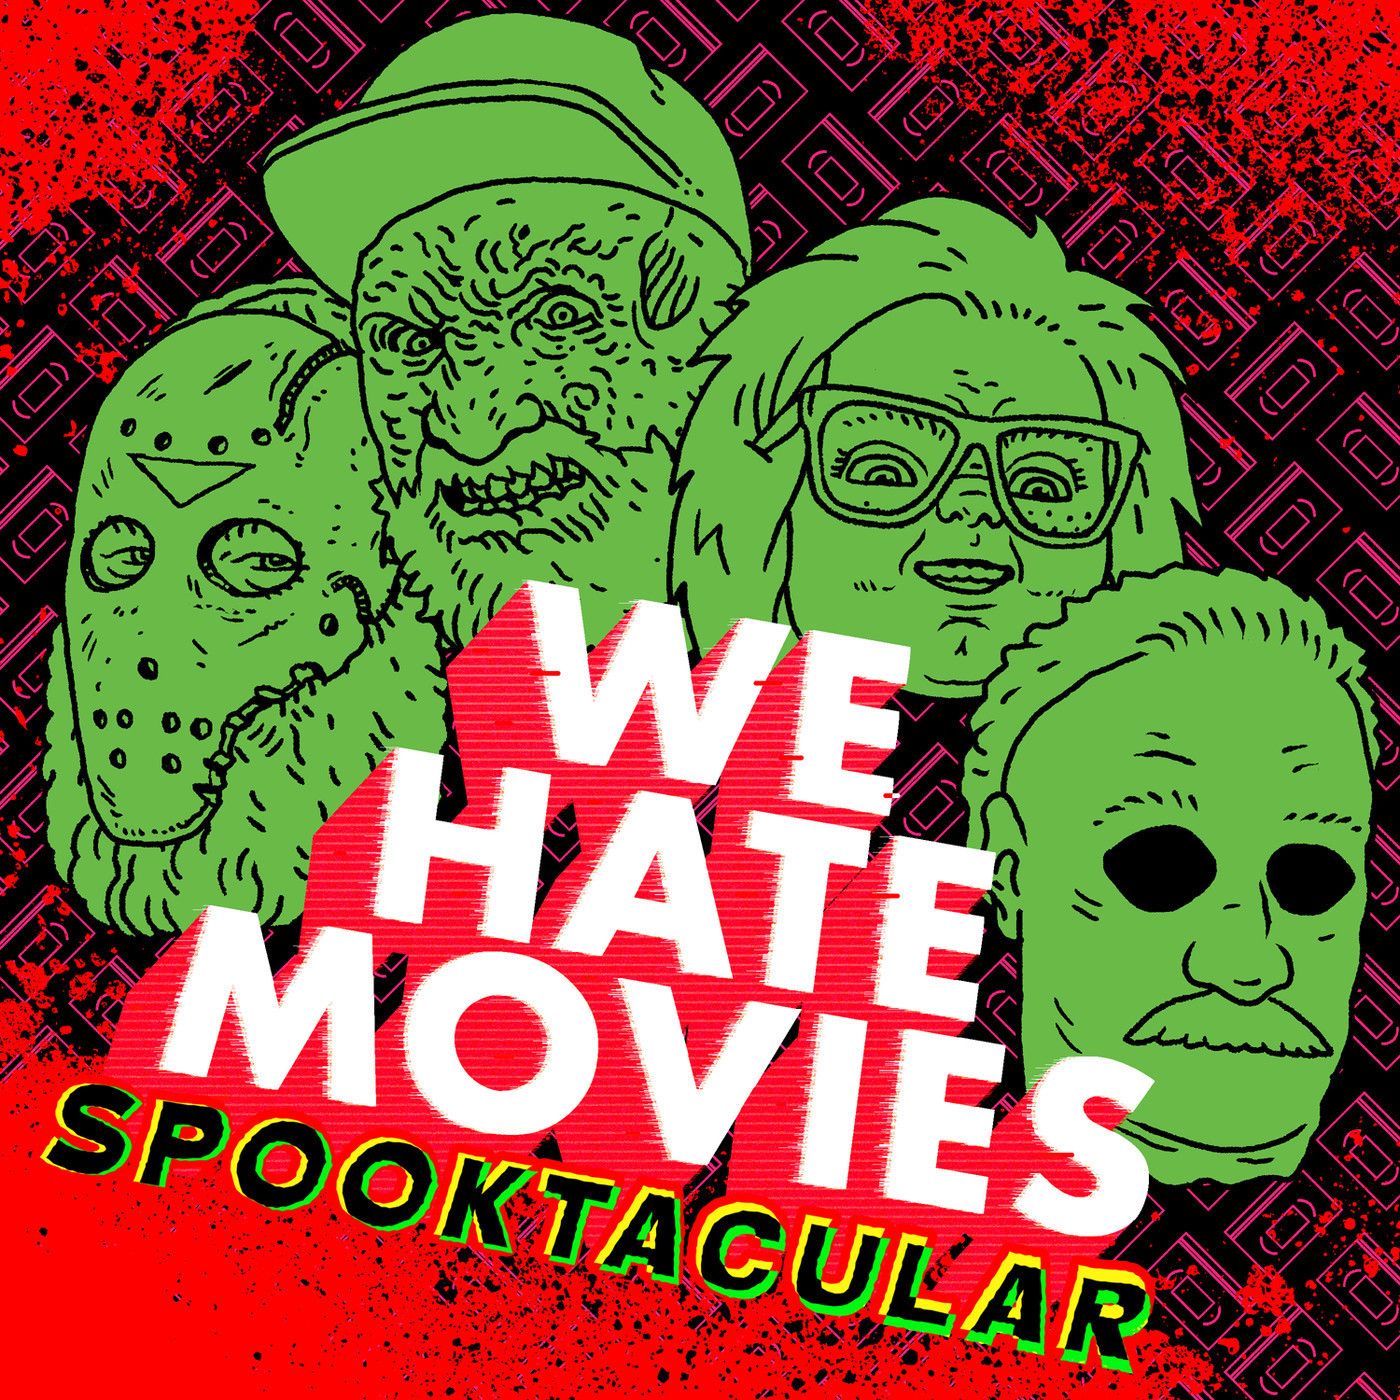 We Hate Movies / Episode Texas Chainsaw Massacre Part 2 (PREVIEW)